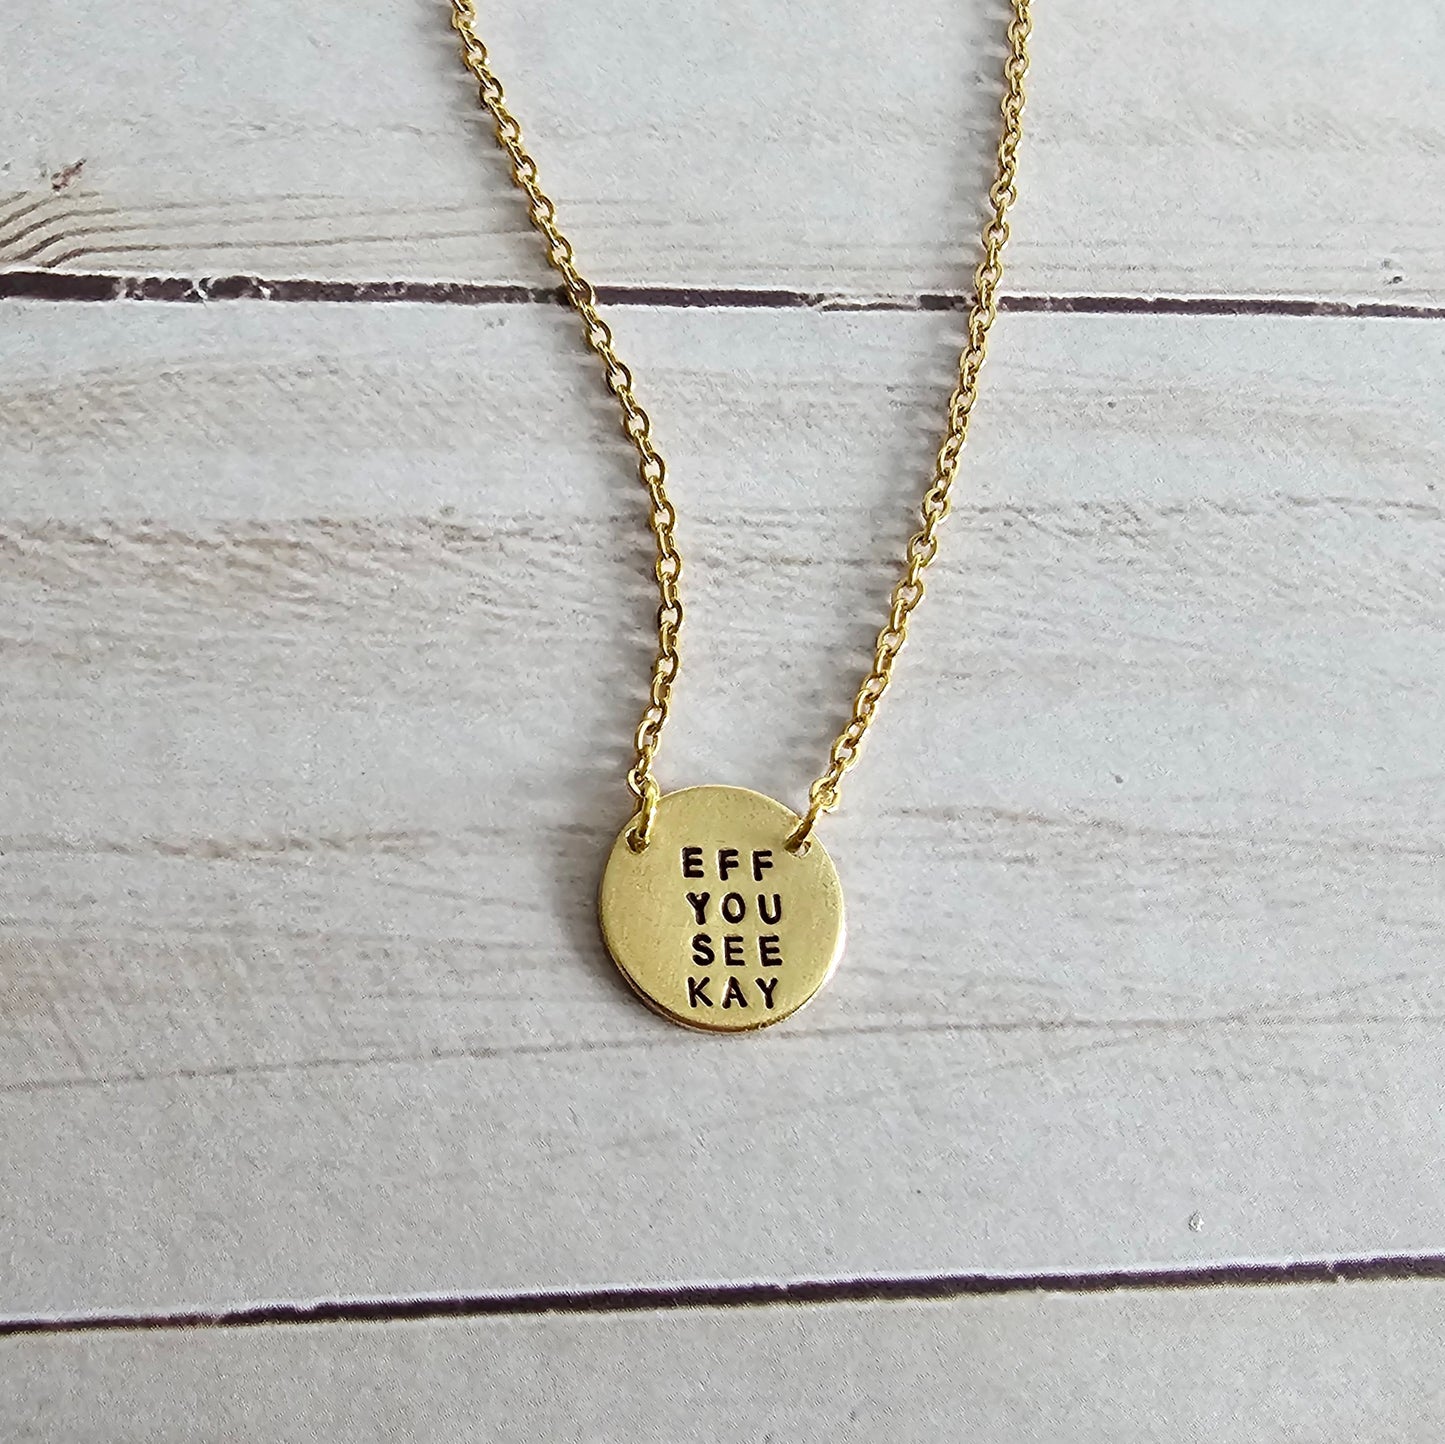 Tiny Brass Disc Necklace with Saying - Be True To You, Know Your Worth, Bad Vibes Only, Eff You See Kay, Let That Shit Go